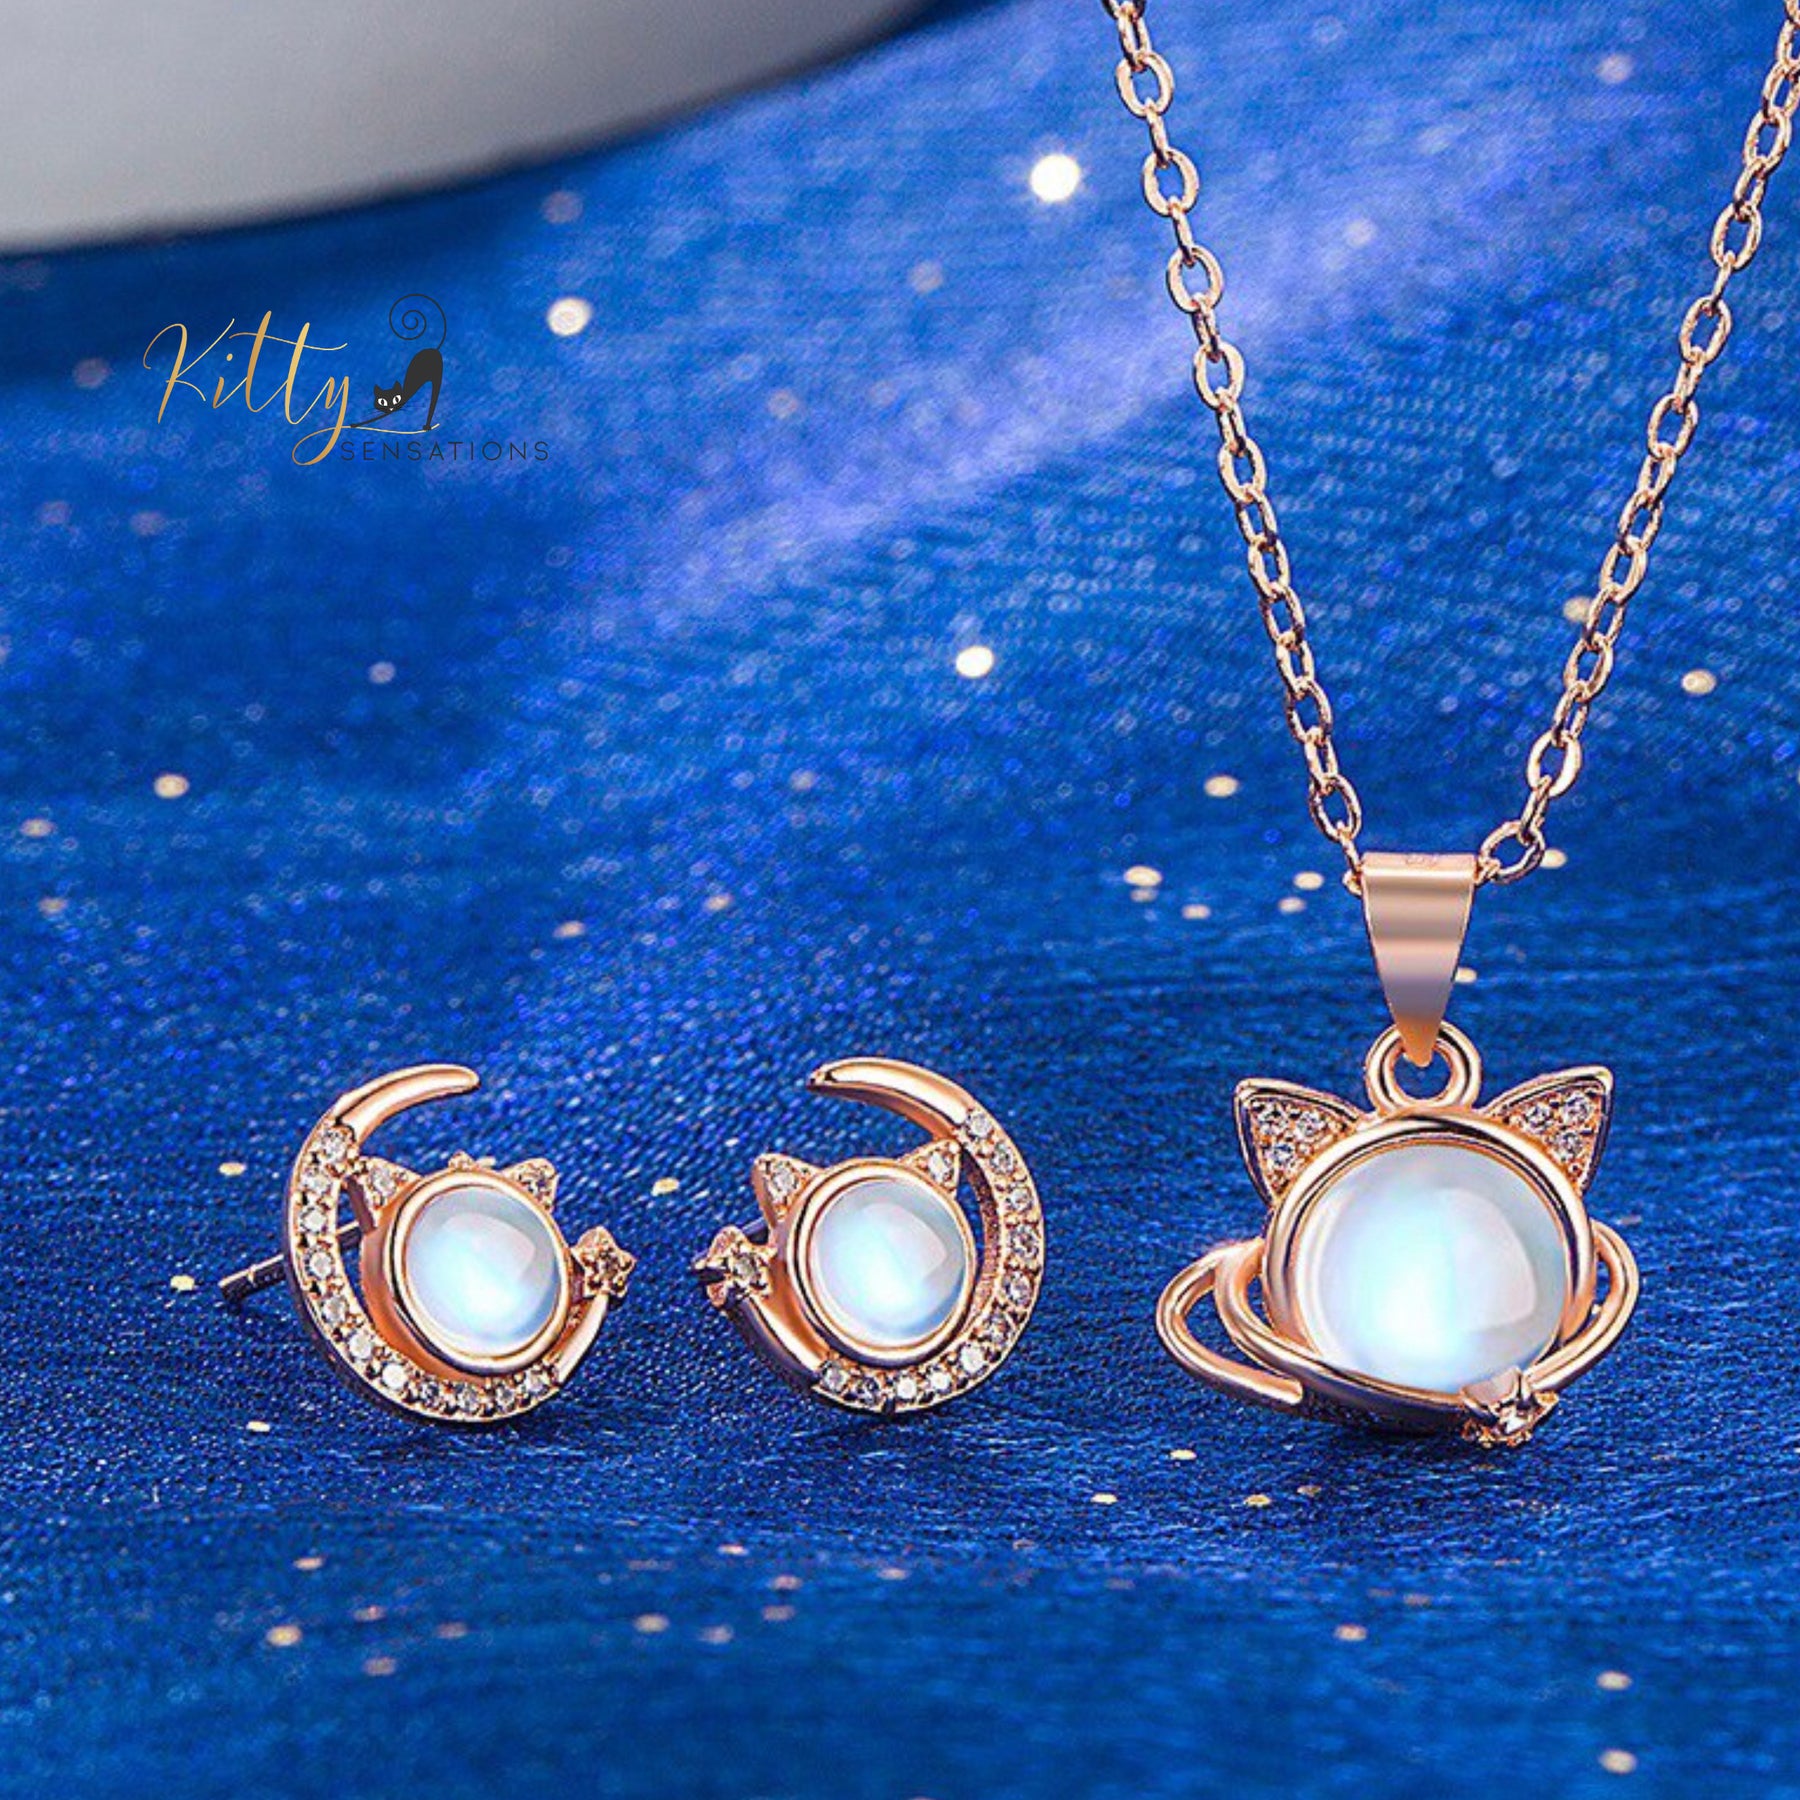 www.KittySensations.com: Cosmic Crystal Cat Jewelry Set in Solid 925 Sterling Silver and CZ ($33.95): https://www.kittysensations.com/products/cosmic-crystal-cat-jewelry-set-in-solid-925-sterling-silver